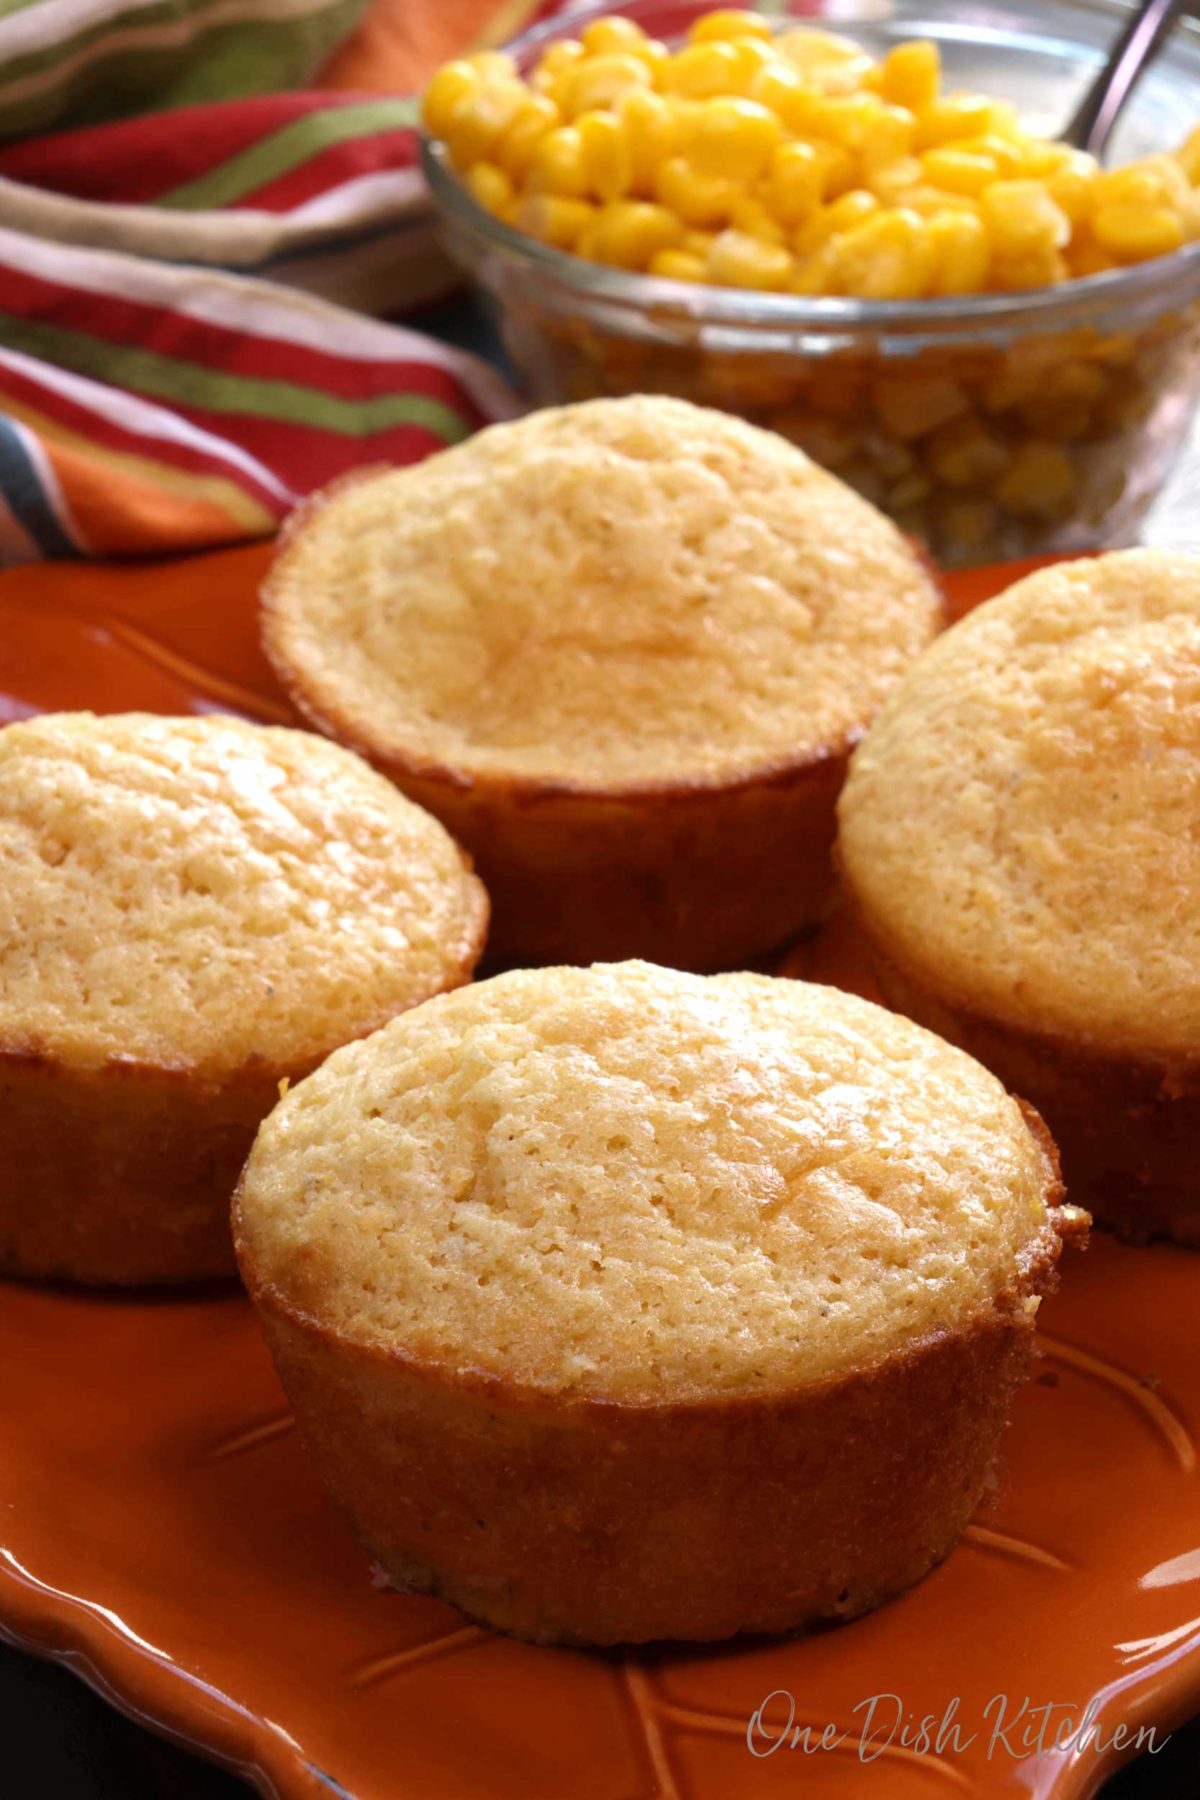 four corn muffins on a plate next to a bowl of corn.